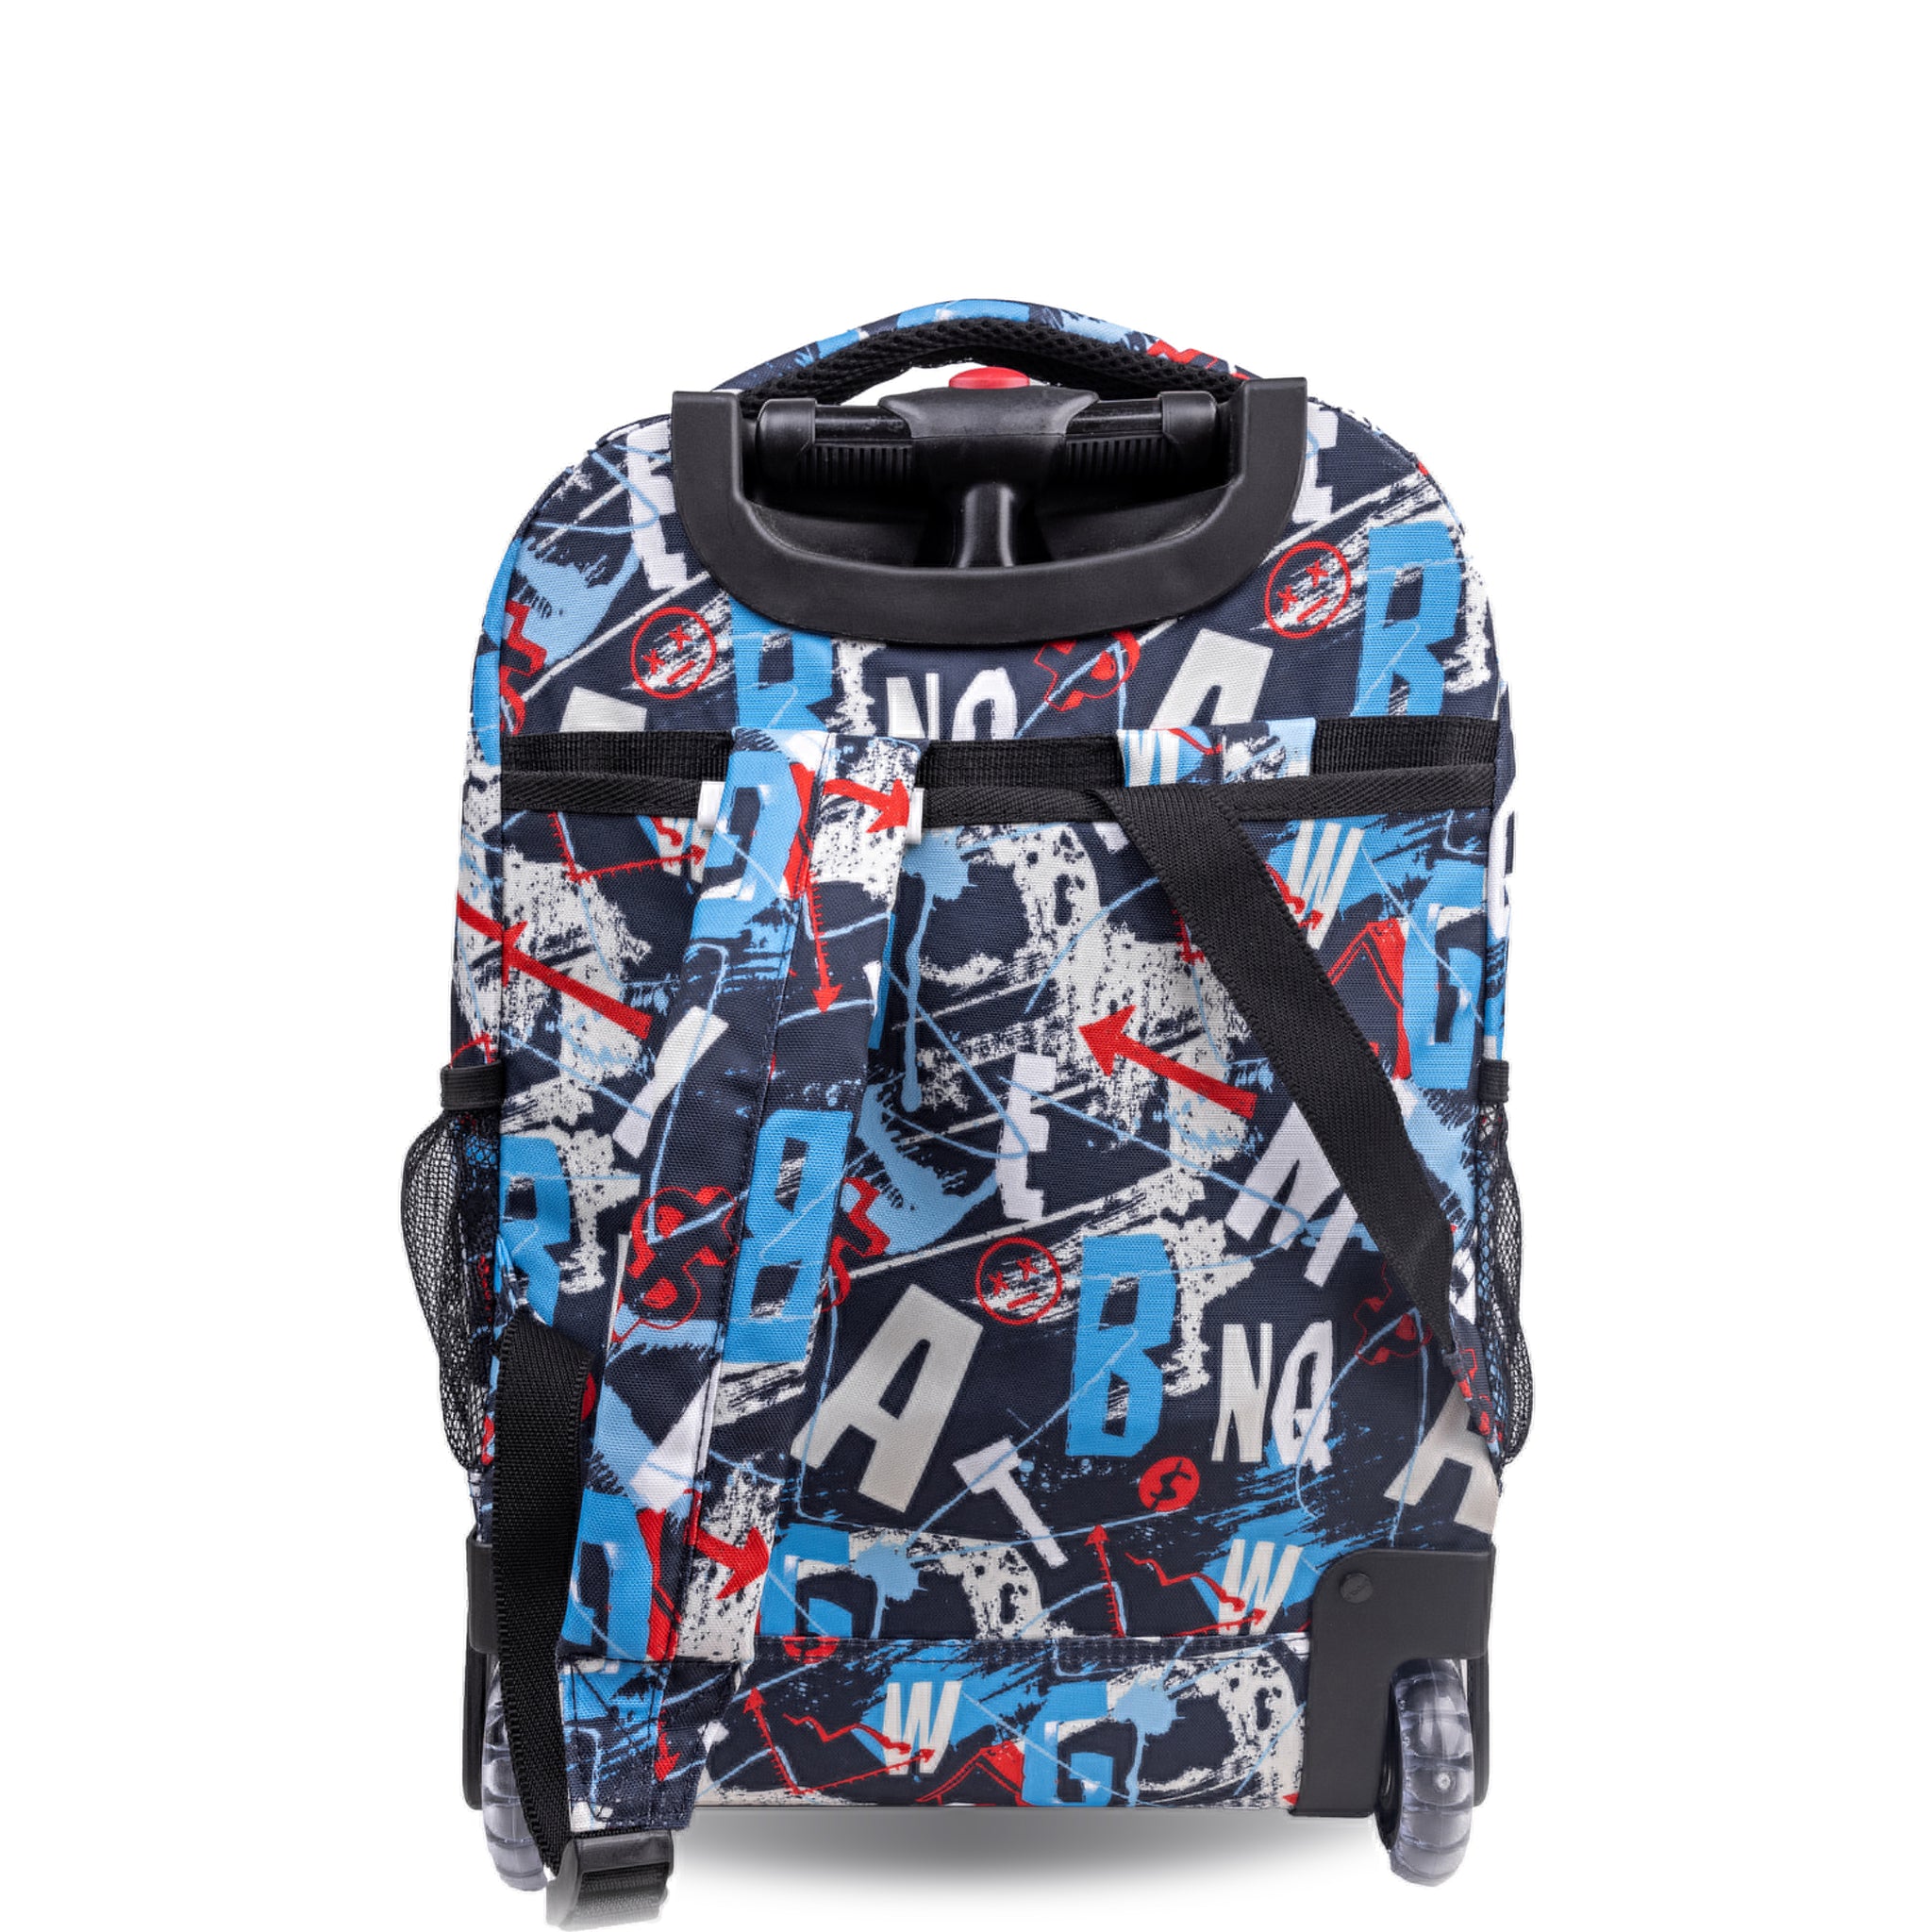 J World Boys and Girls Sunny 17" Kids Rolling Backpack for School and Travel, Graffiti